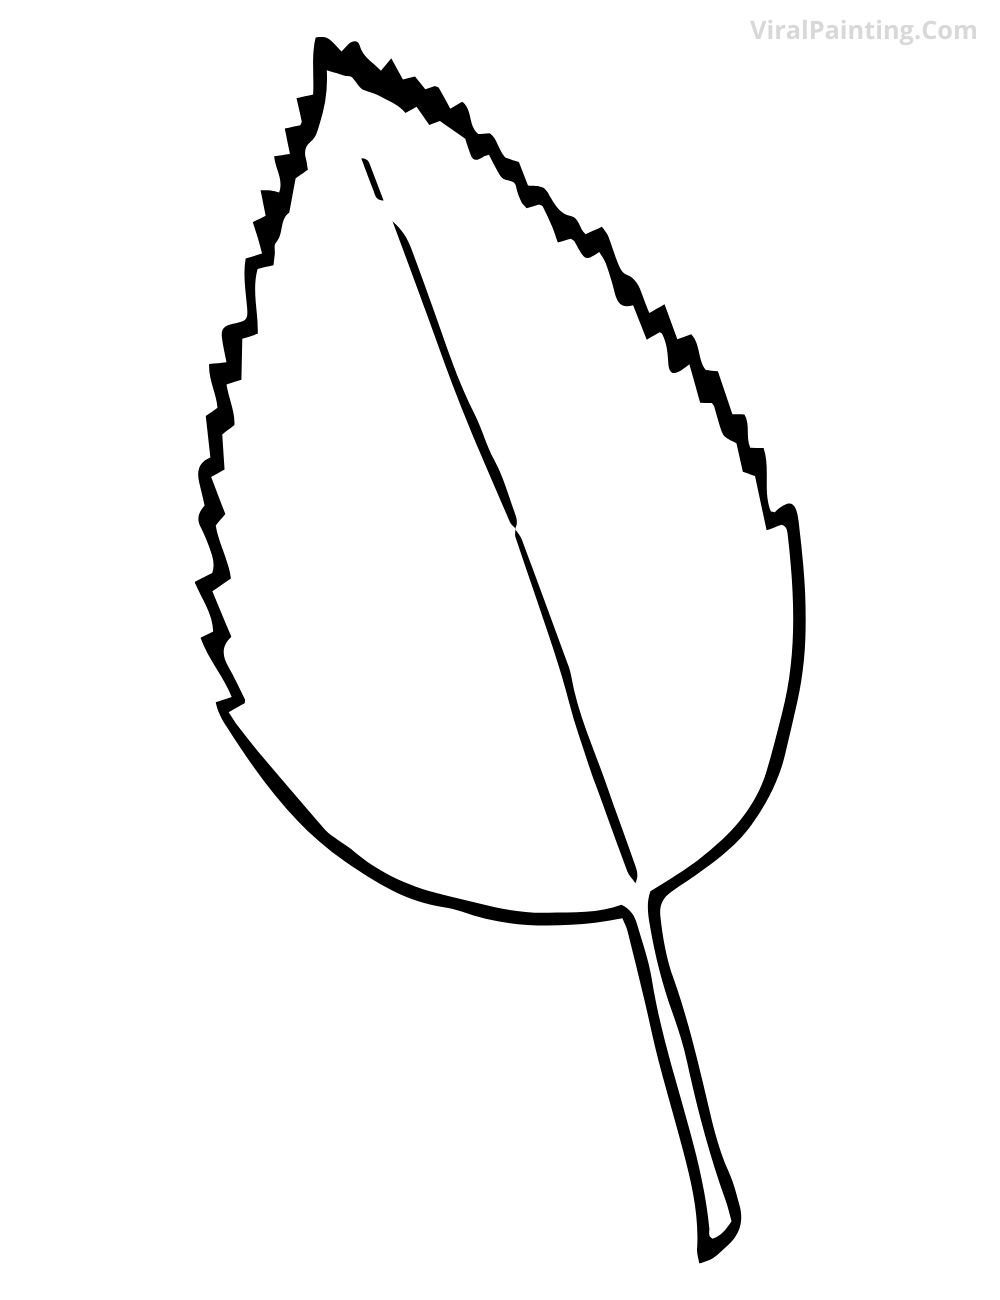 Simple to make Leaf drawing ideasby viralpainting.com